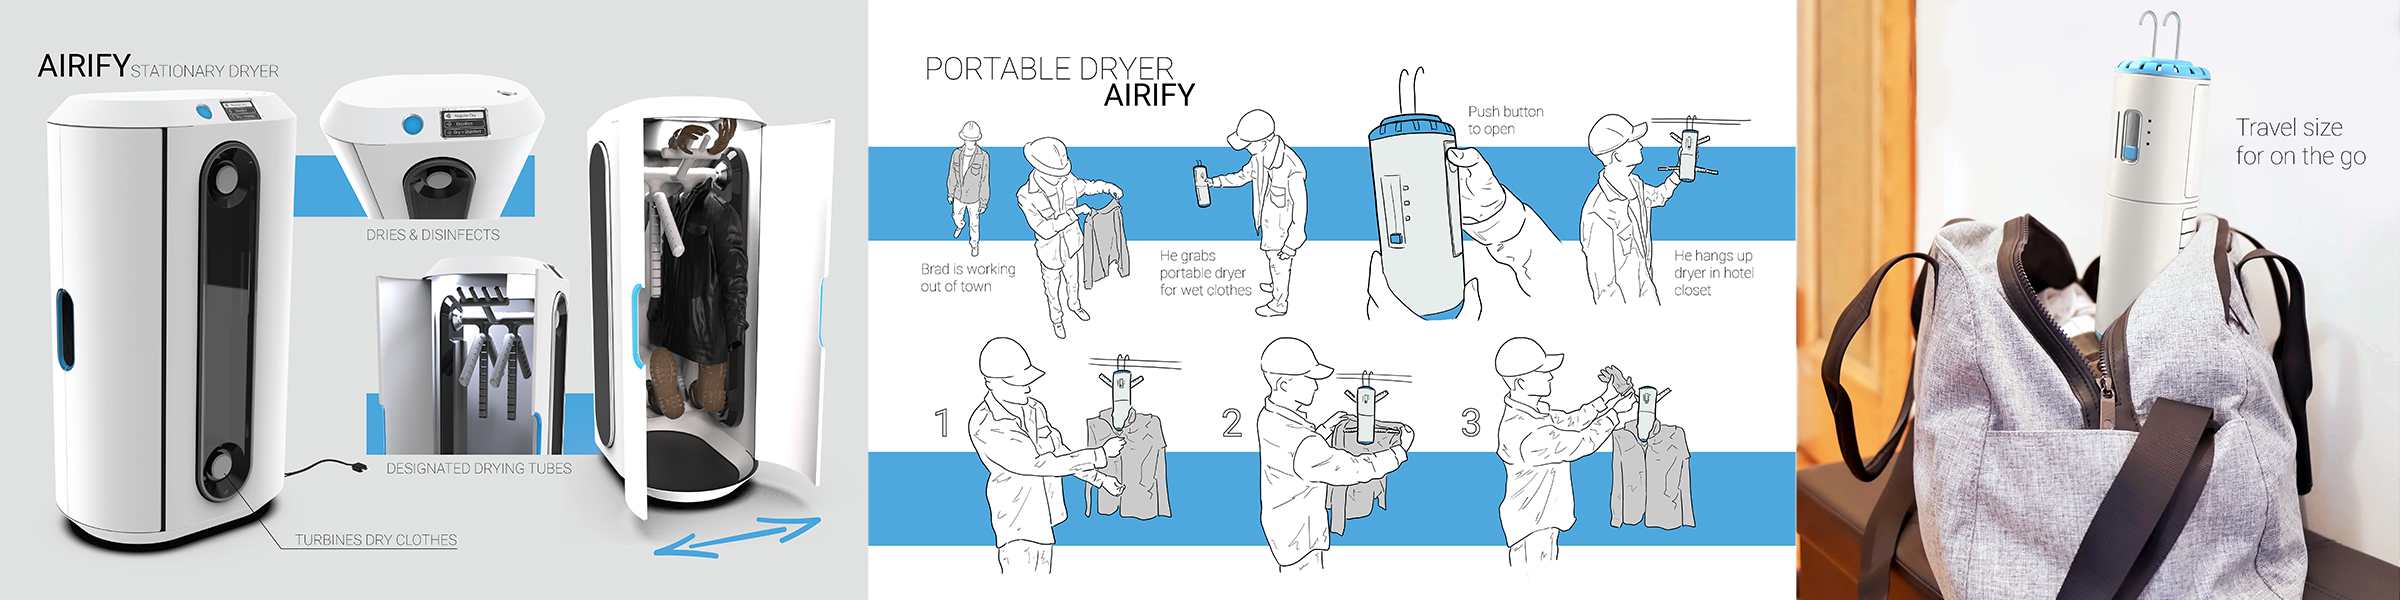 Student prototype for a portable dryer airify